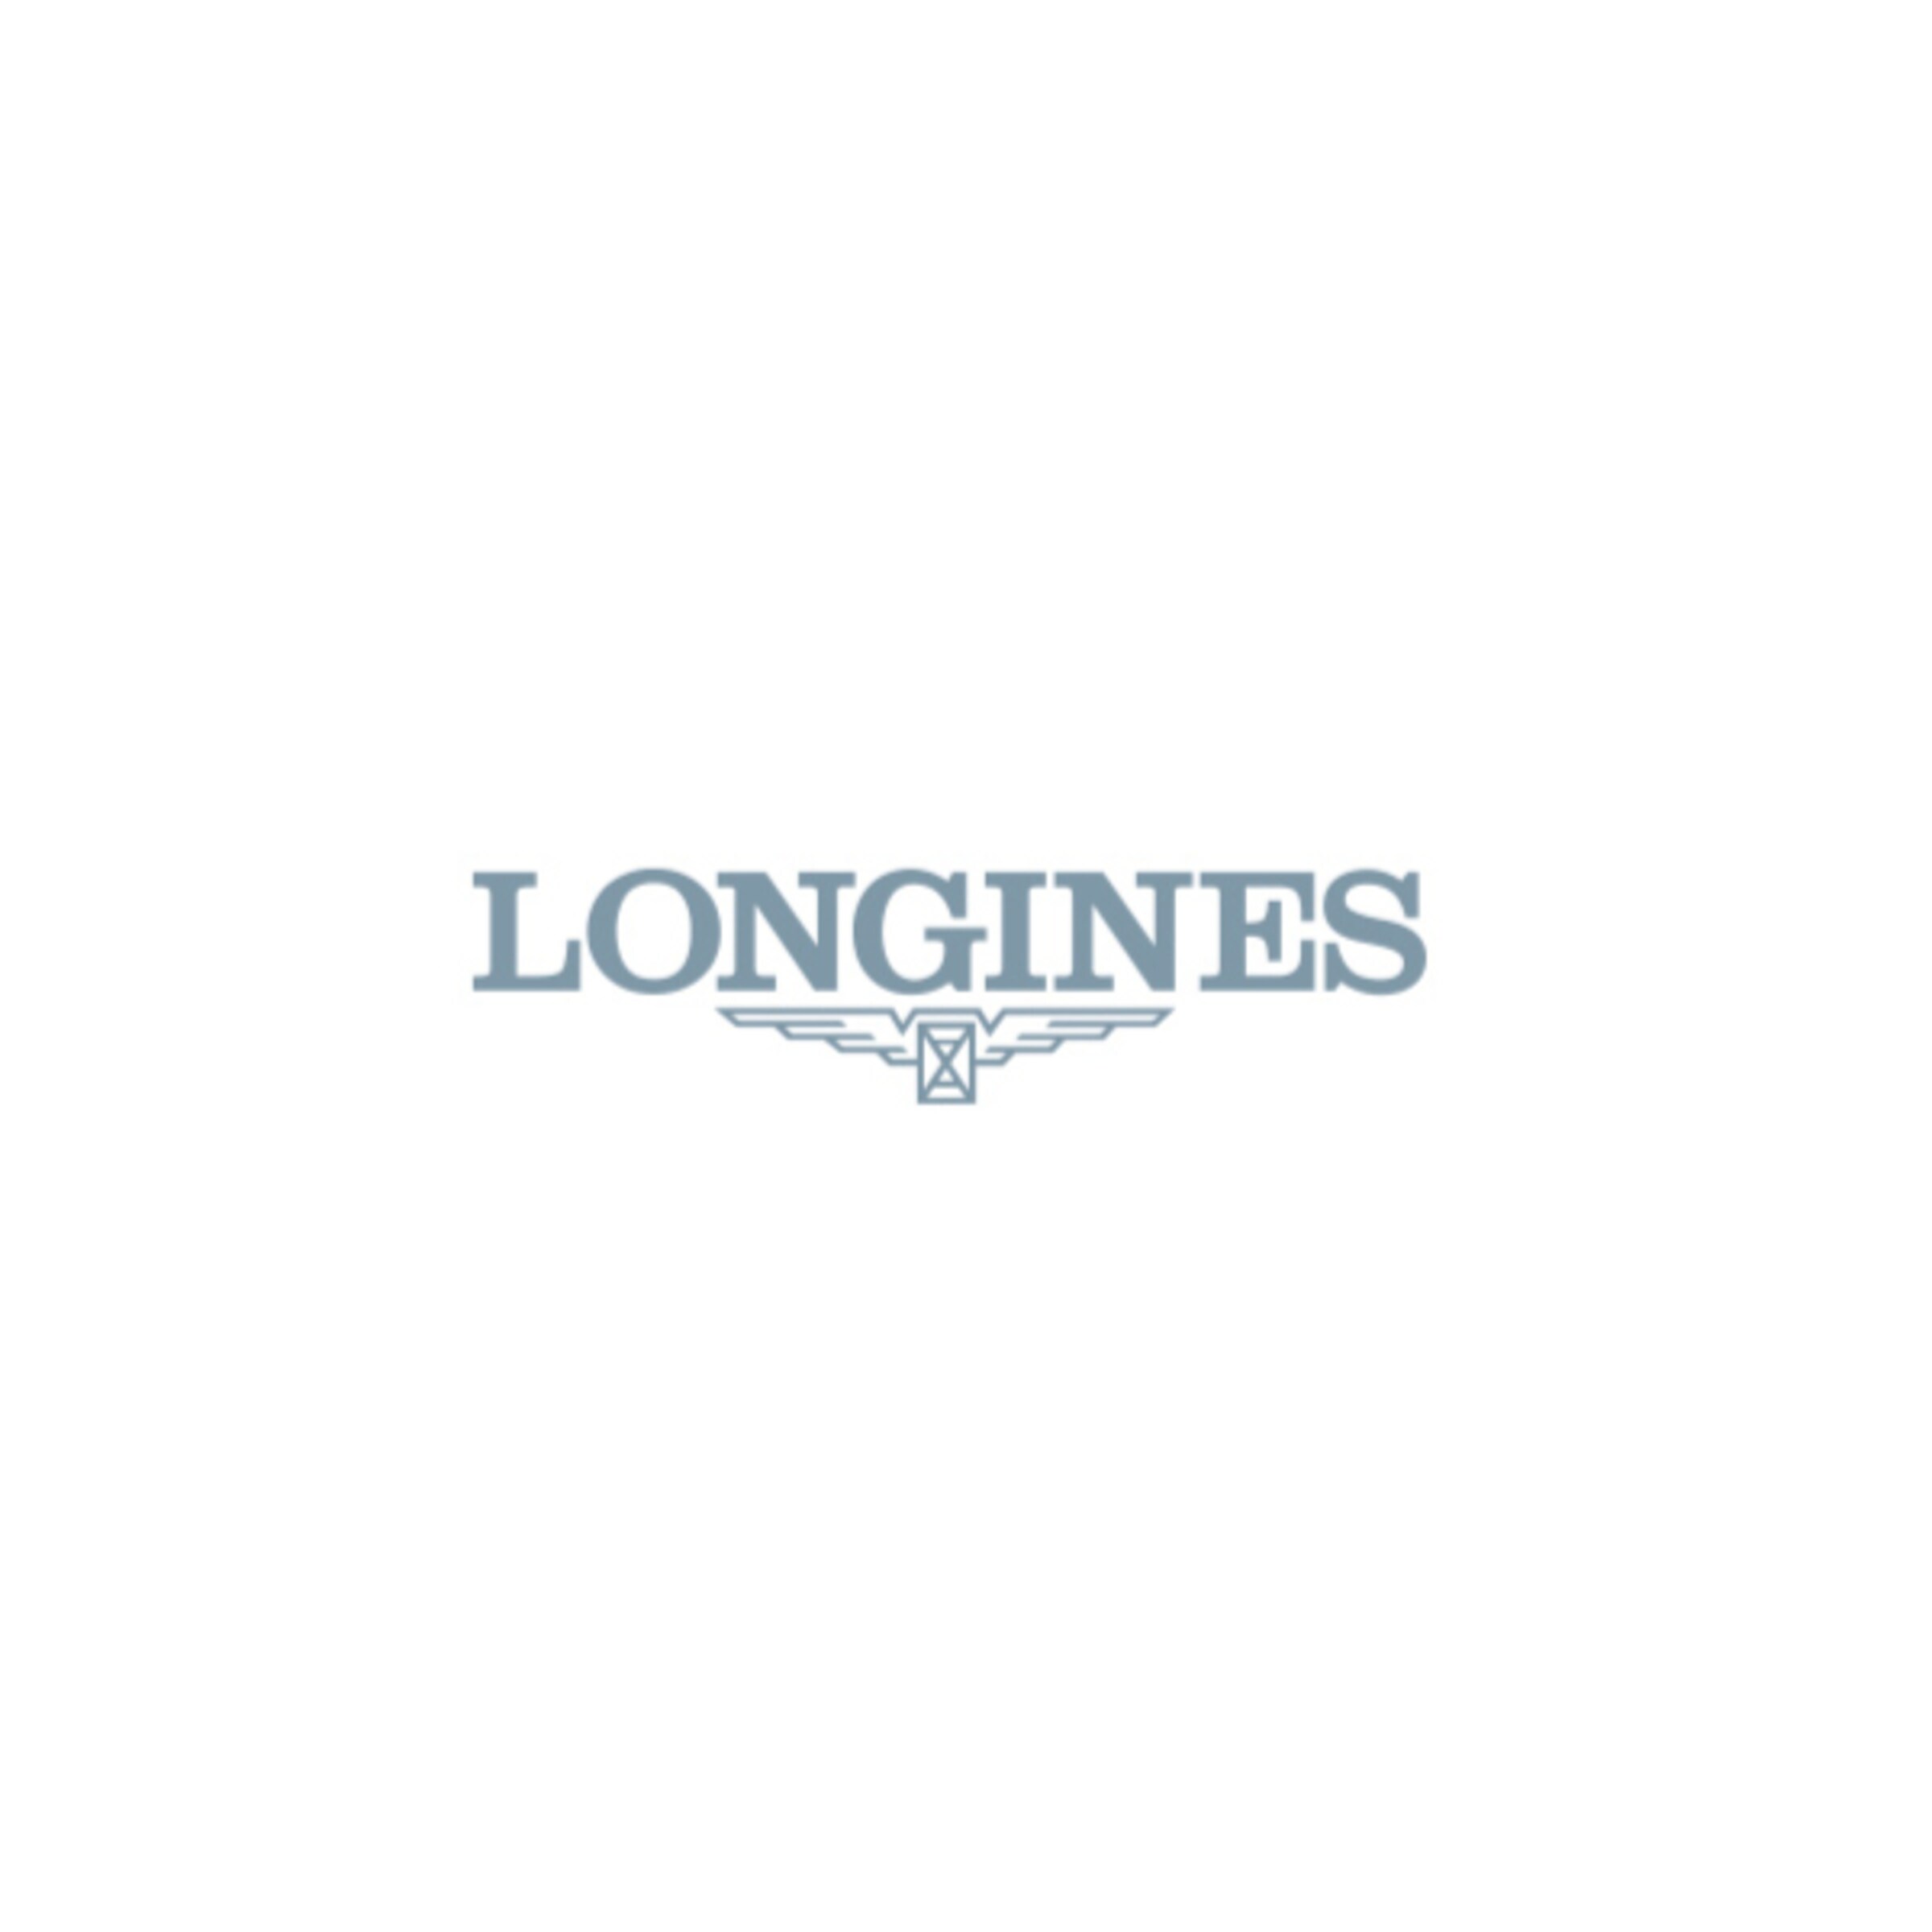 Longines HYDROCONQUEST Automatic Stainless steel and ceramic bezel Watch - L3.781.3.78.7